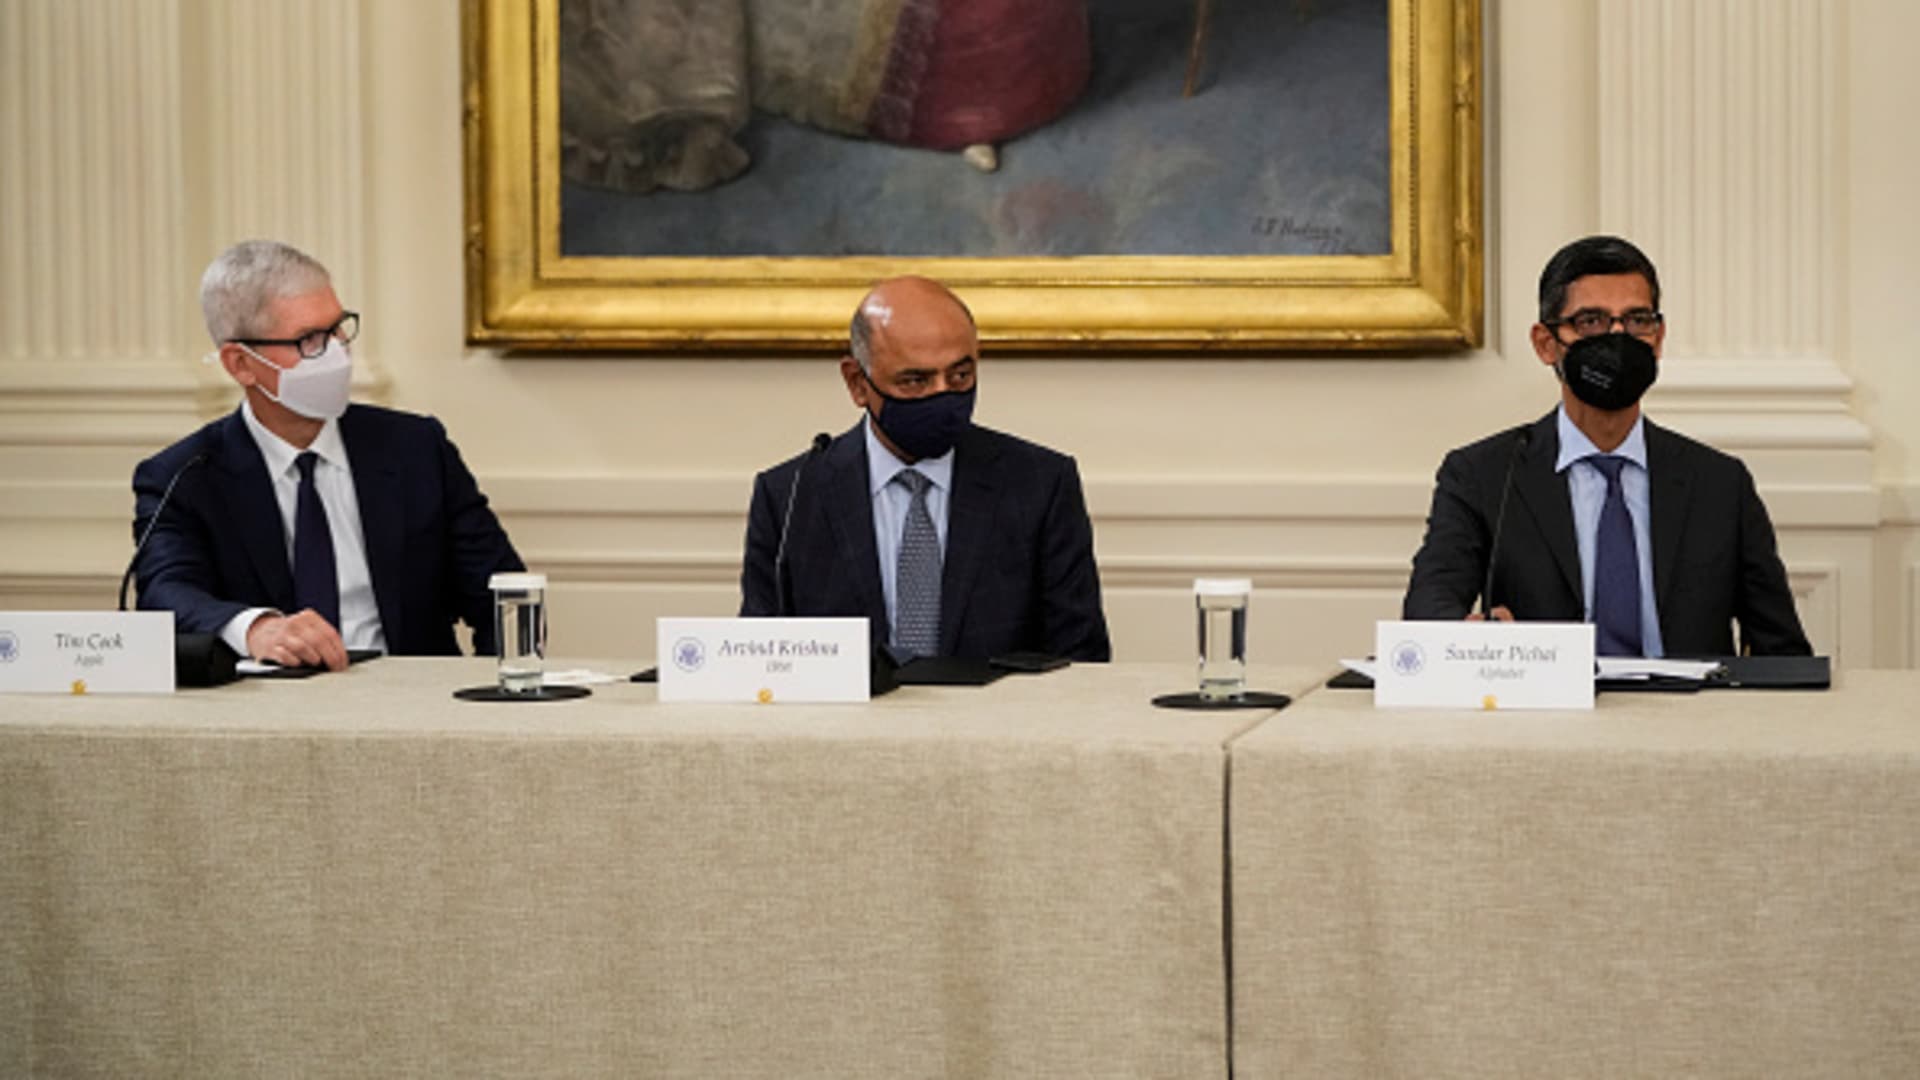 (L-R) Apple CEO Tim Cook, IBM CEO Arvind Krishna and Google CEO Sundar Pichai listen as U.S. President Joe Biden speaks during a meeting about cybersecurity in the East Room of the White House on August 25, 2021 in Washington, DC.